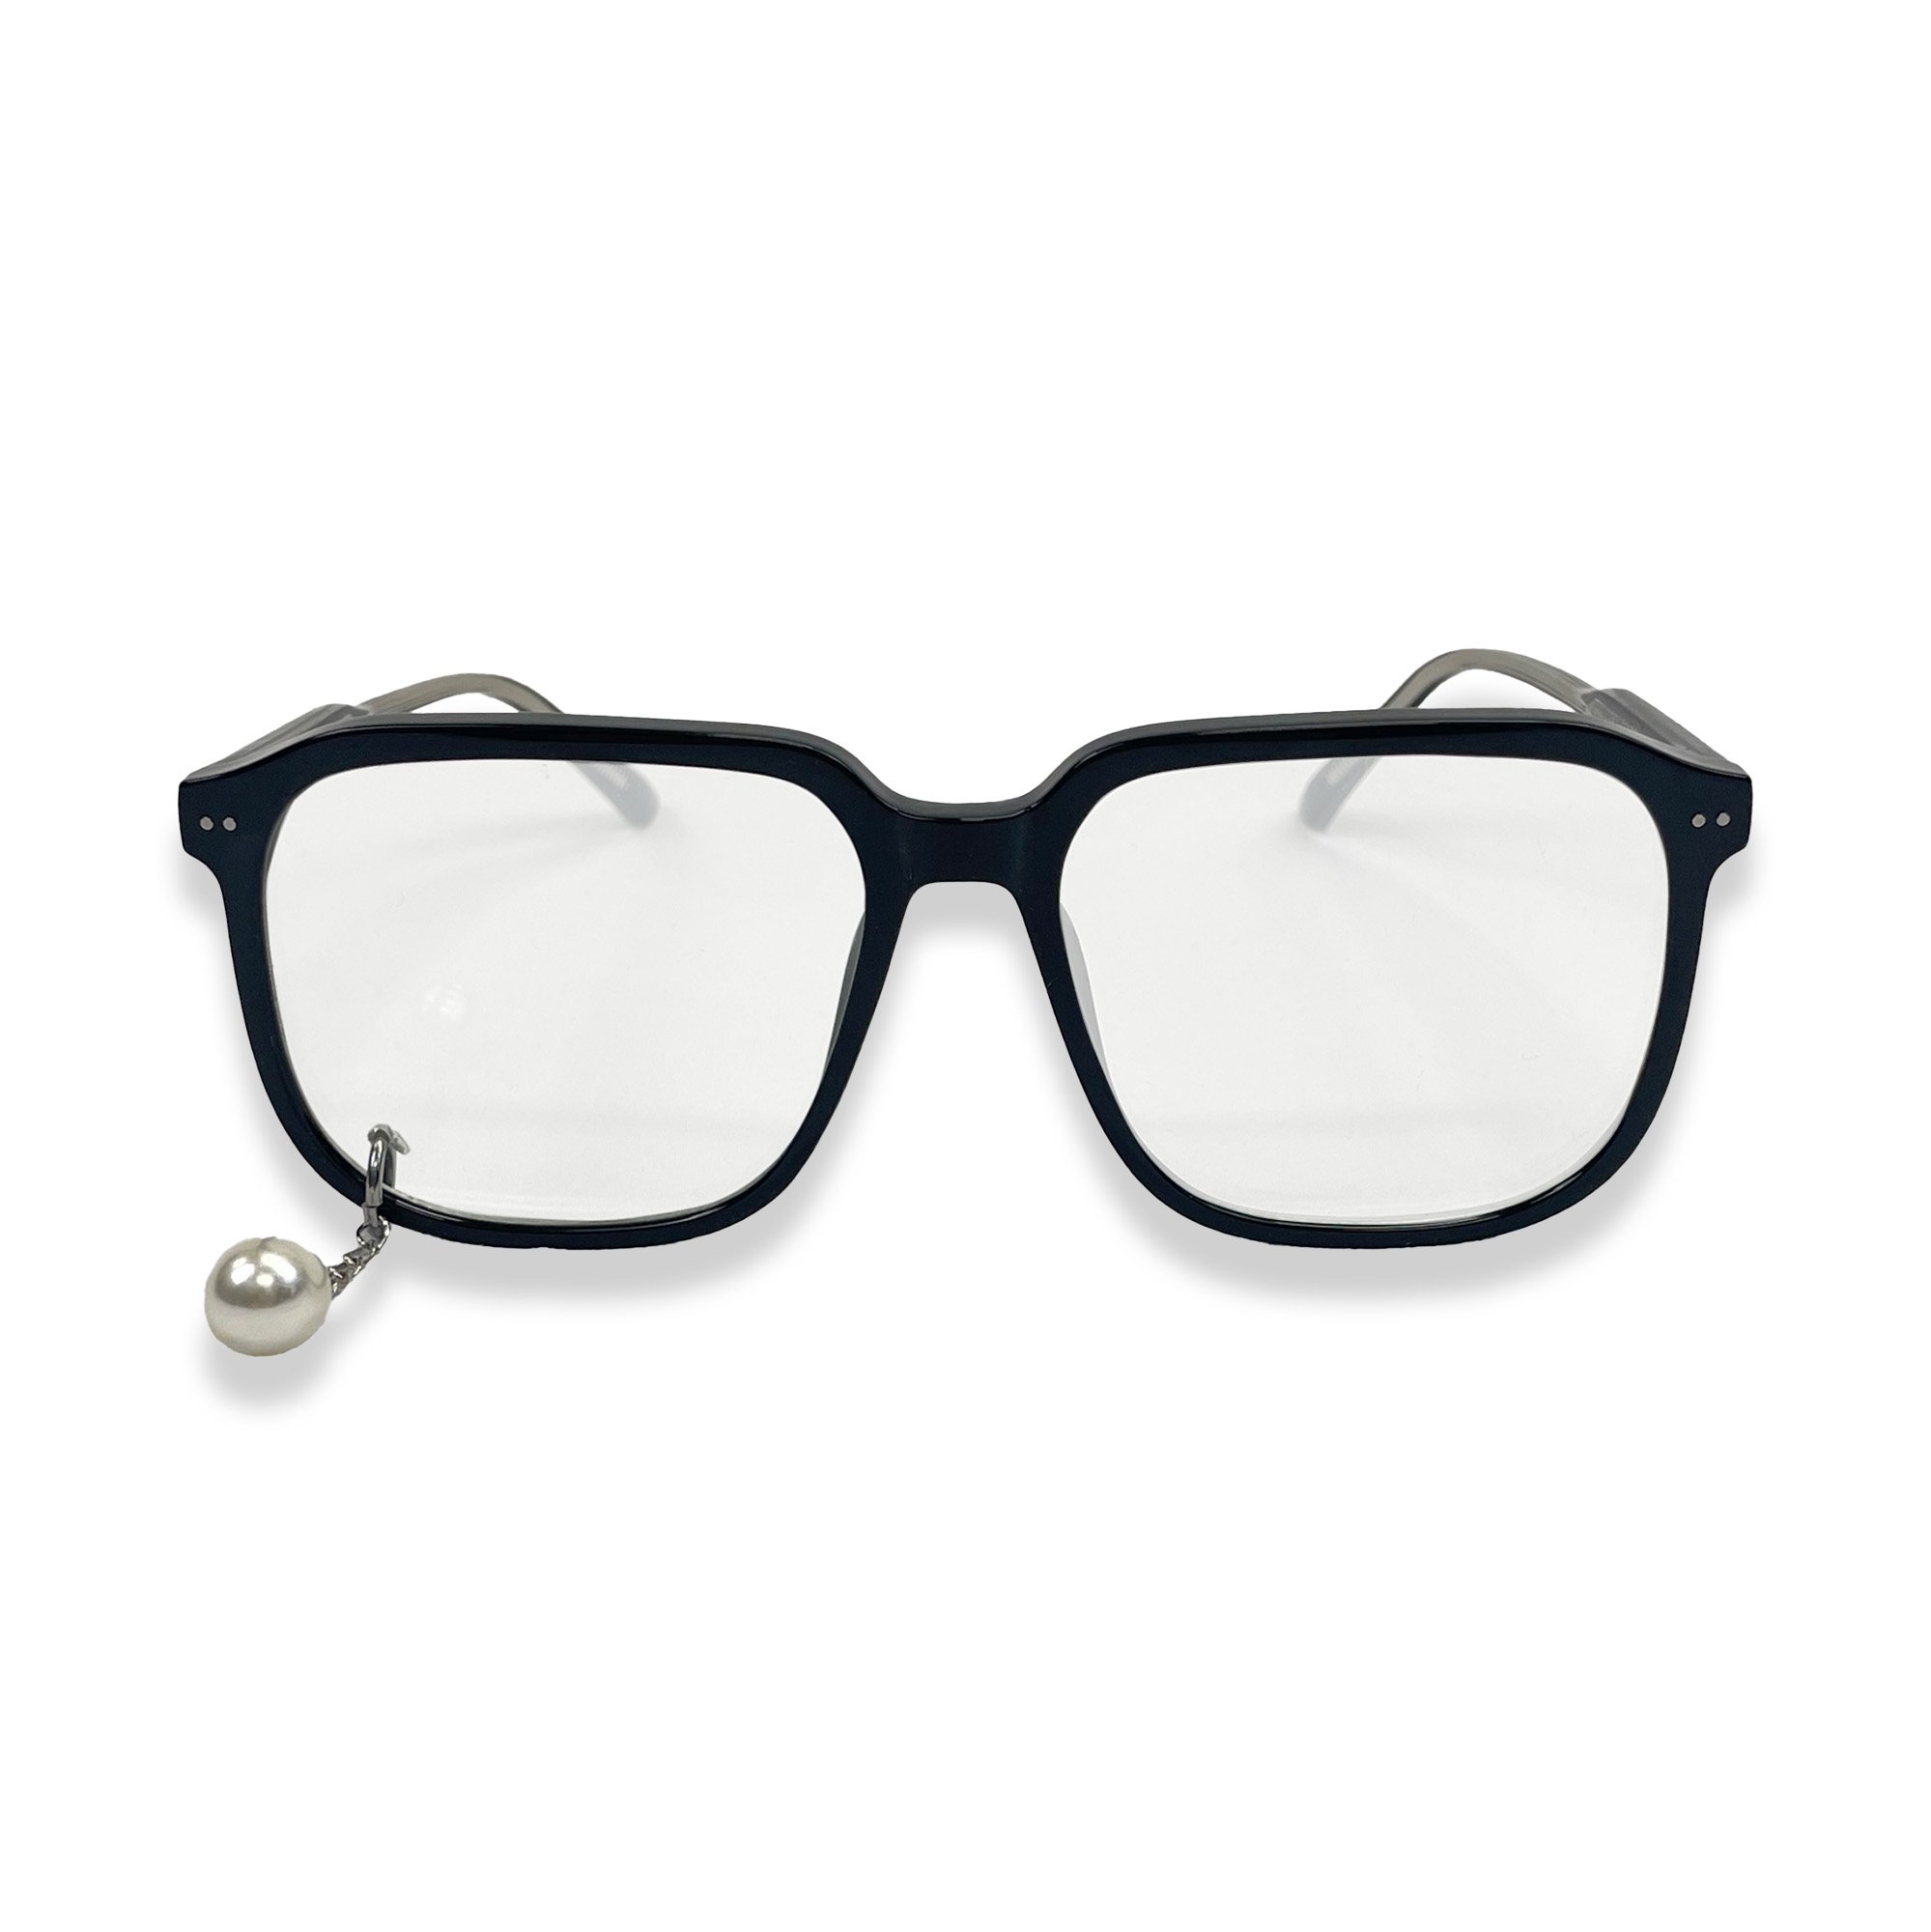 <img class='new_mark_img1' src='https://img.shop-pro.jp/img/new/icons47.gif' style='border:none;display:inline;margin:0px;padding:0px;width:auto;' />KIMHEKIM PEARL TIAR GLASSES